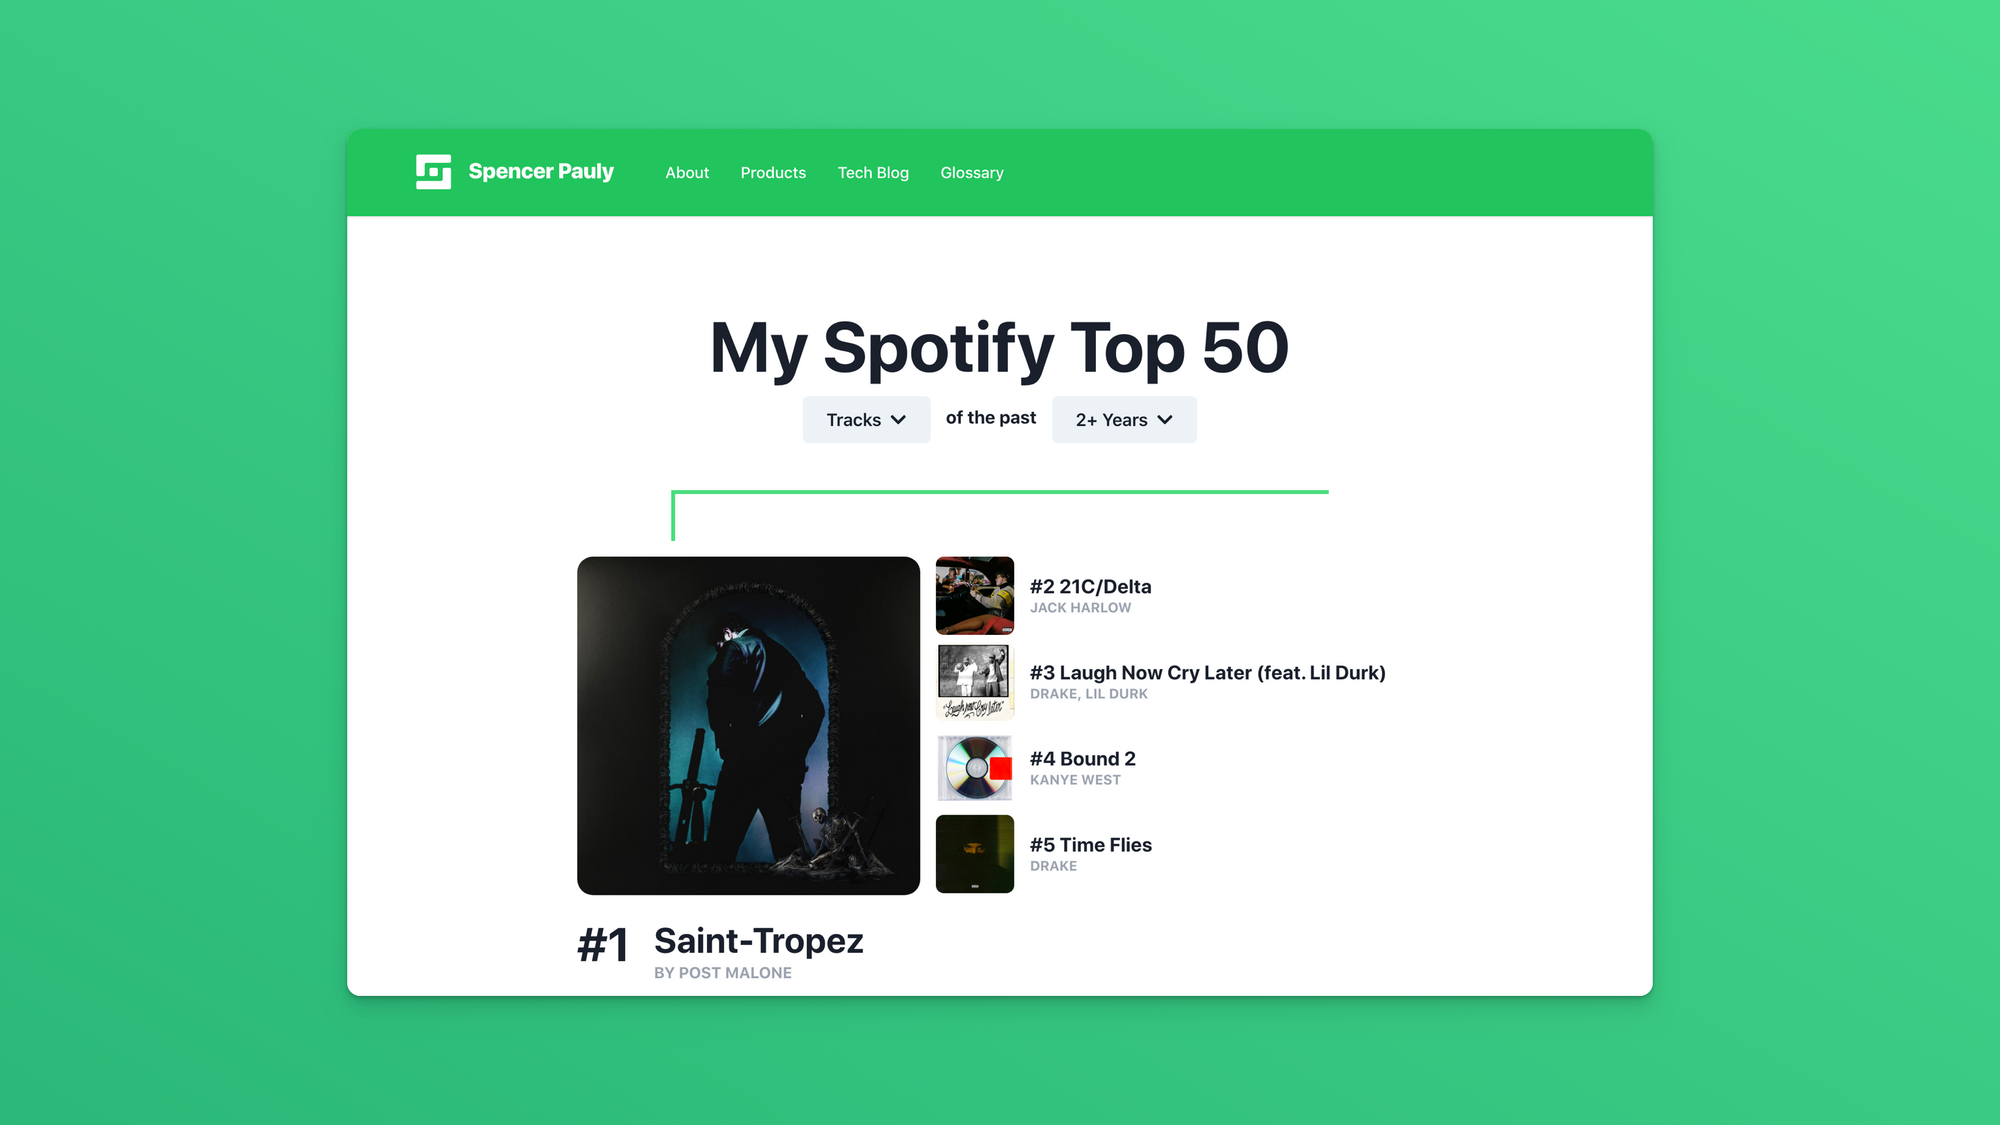 Your Spotify Top 50